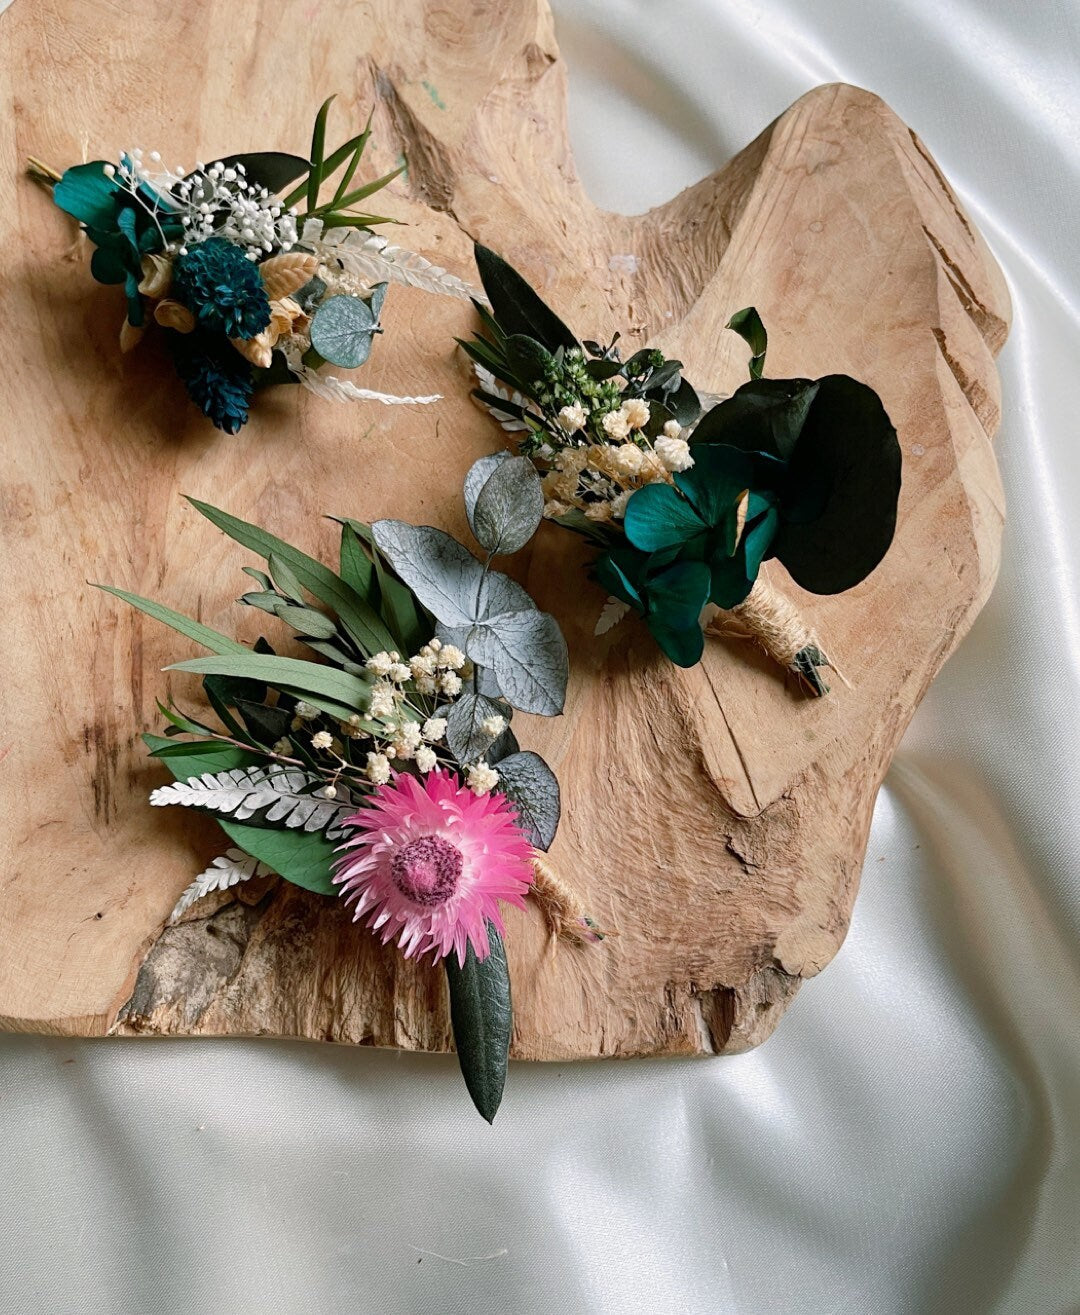 pack of 3 boutonniere Forest green, boutonniere preserved foliage mix dried flower, bridal accessories, wedding DYI